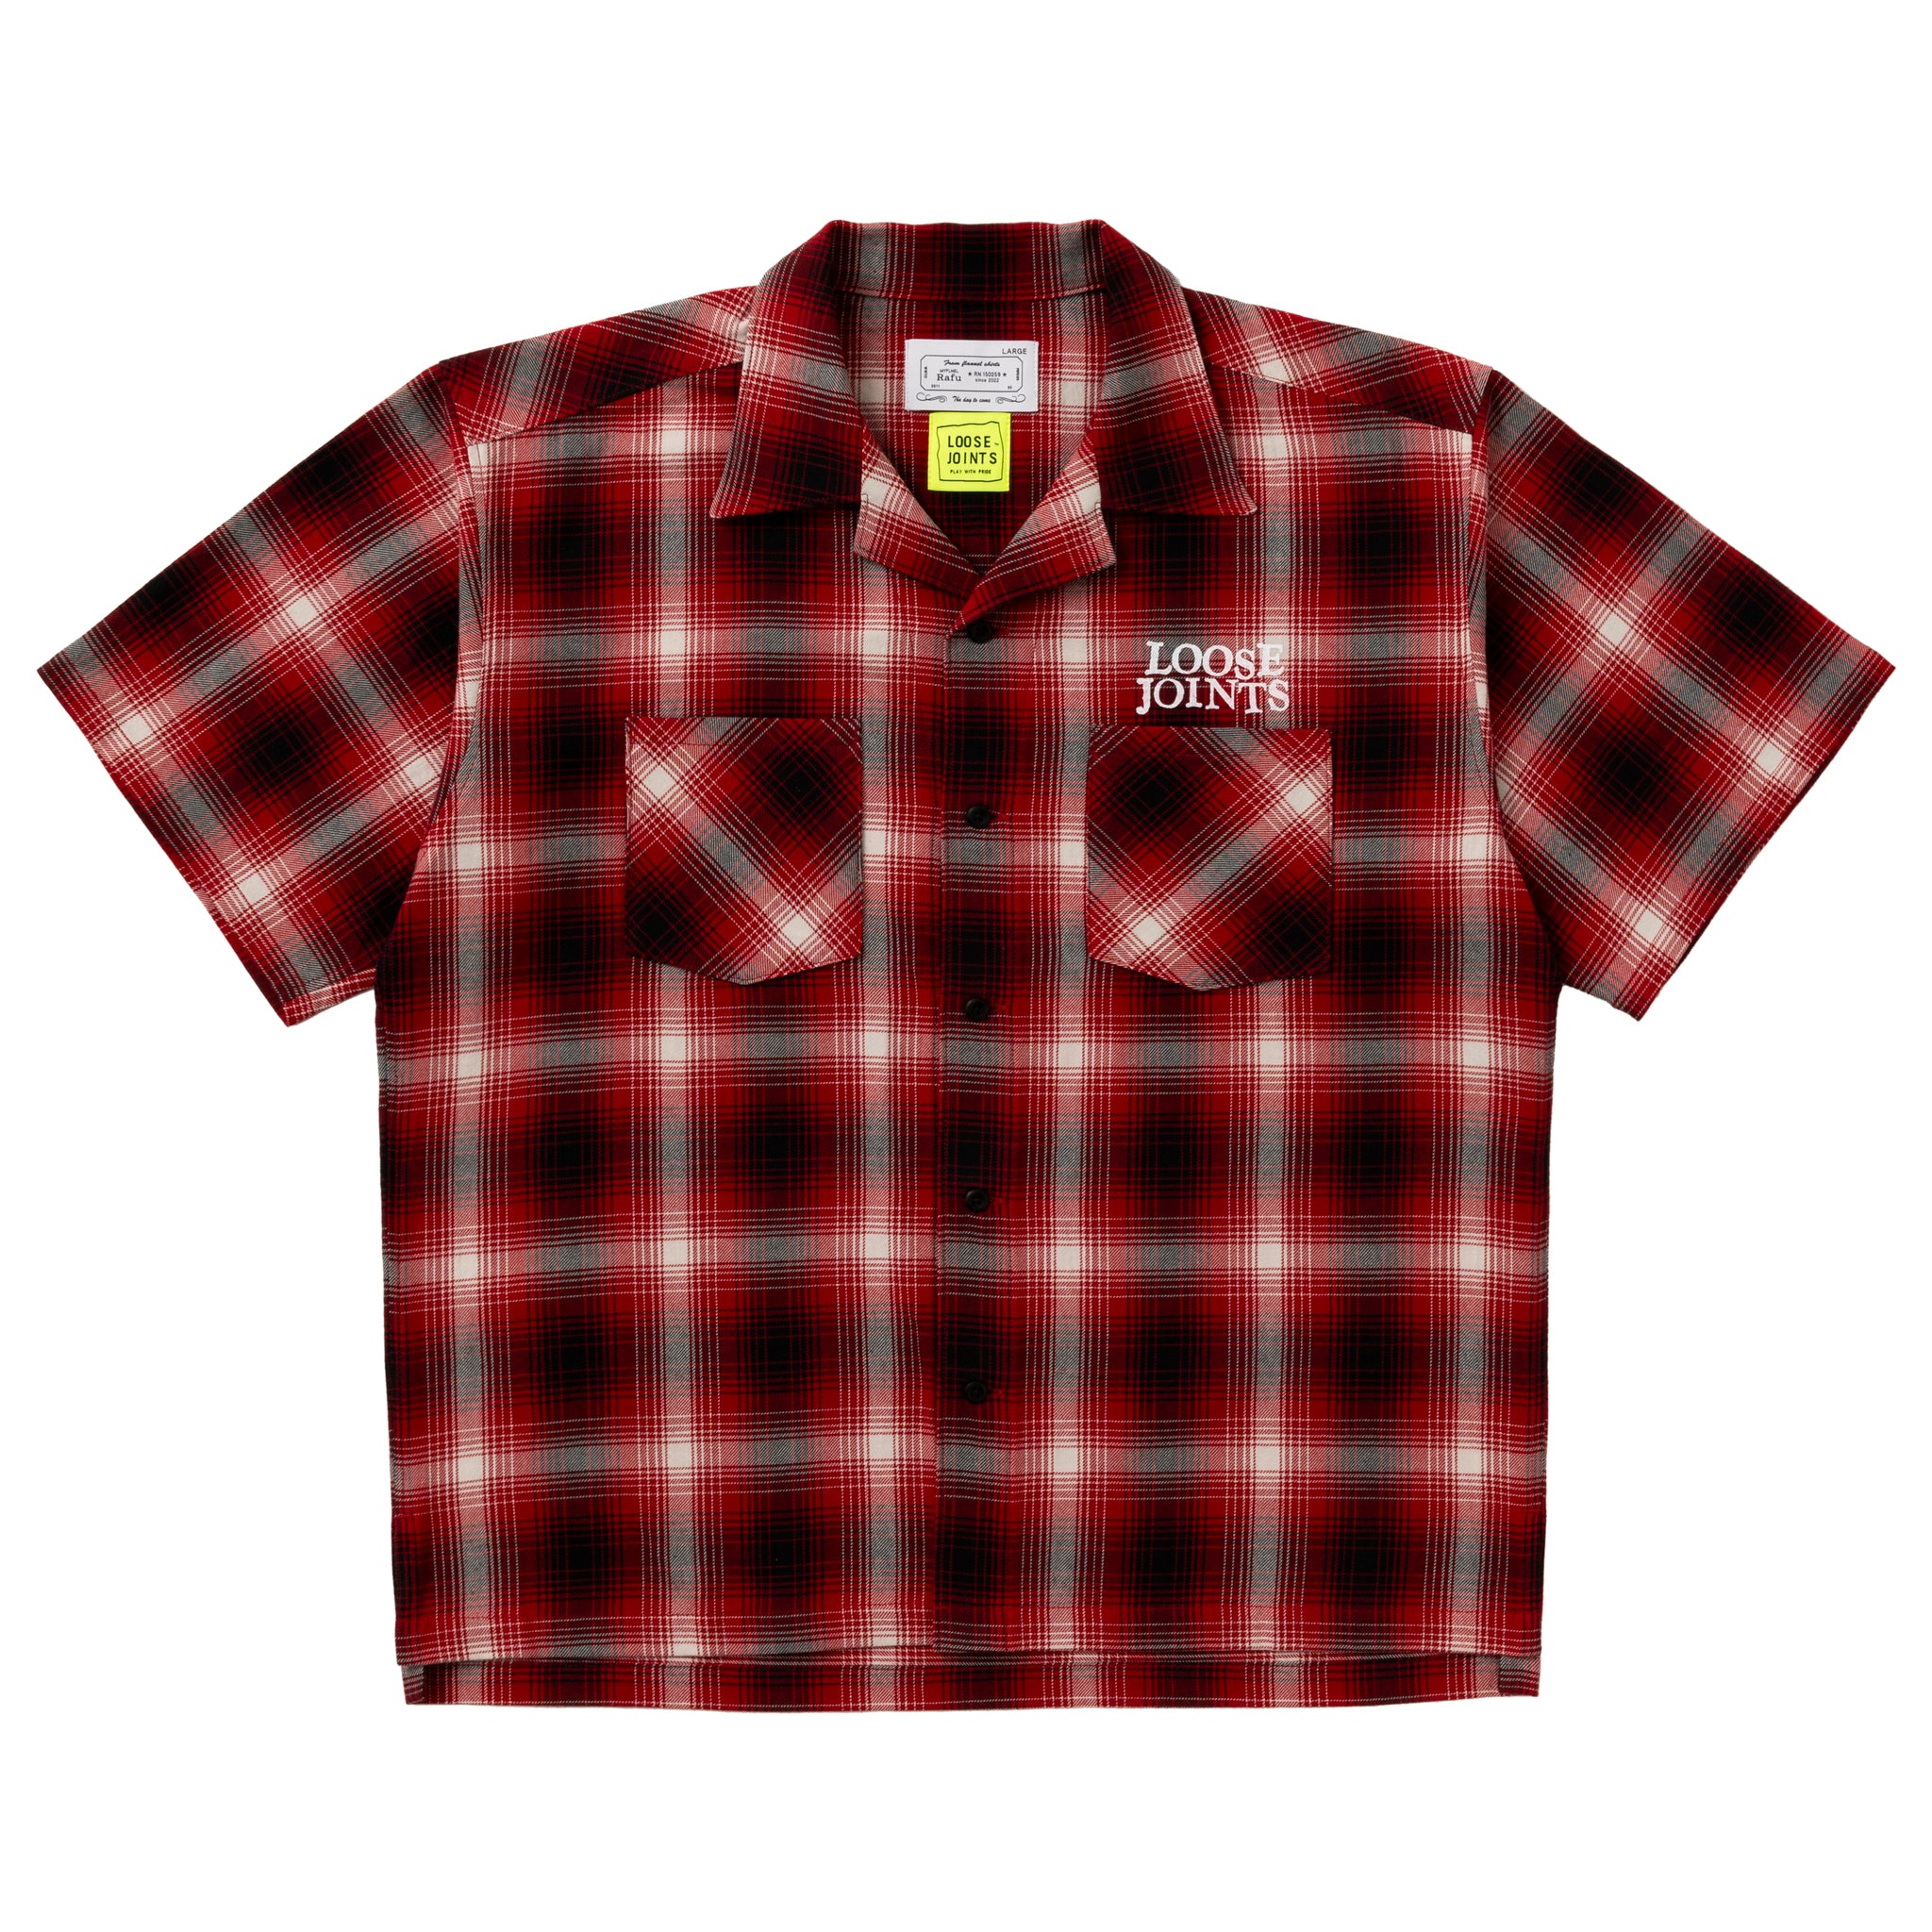 loosejoints≒RAFU - TOMOO GOKITA - 'RIGHT NOW' FLANNEL S/S SHIRTS(Red)